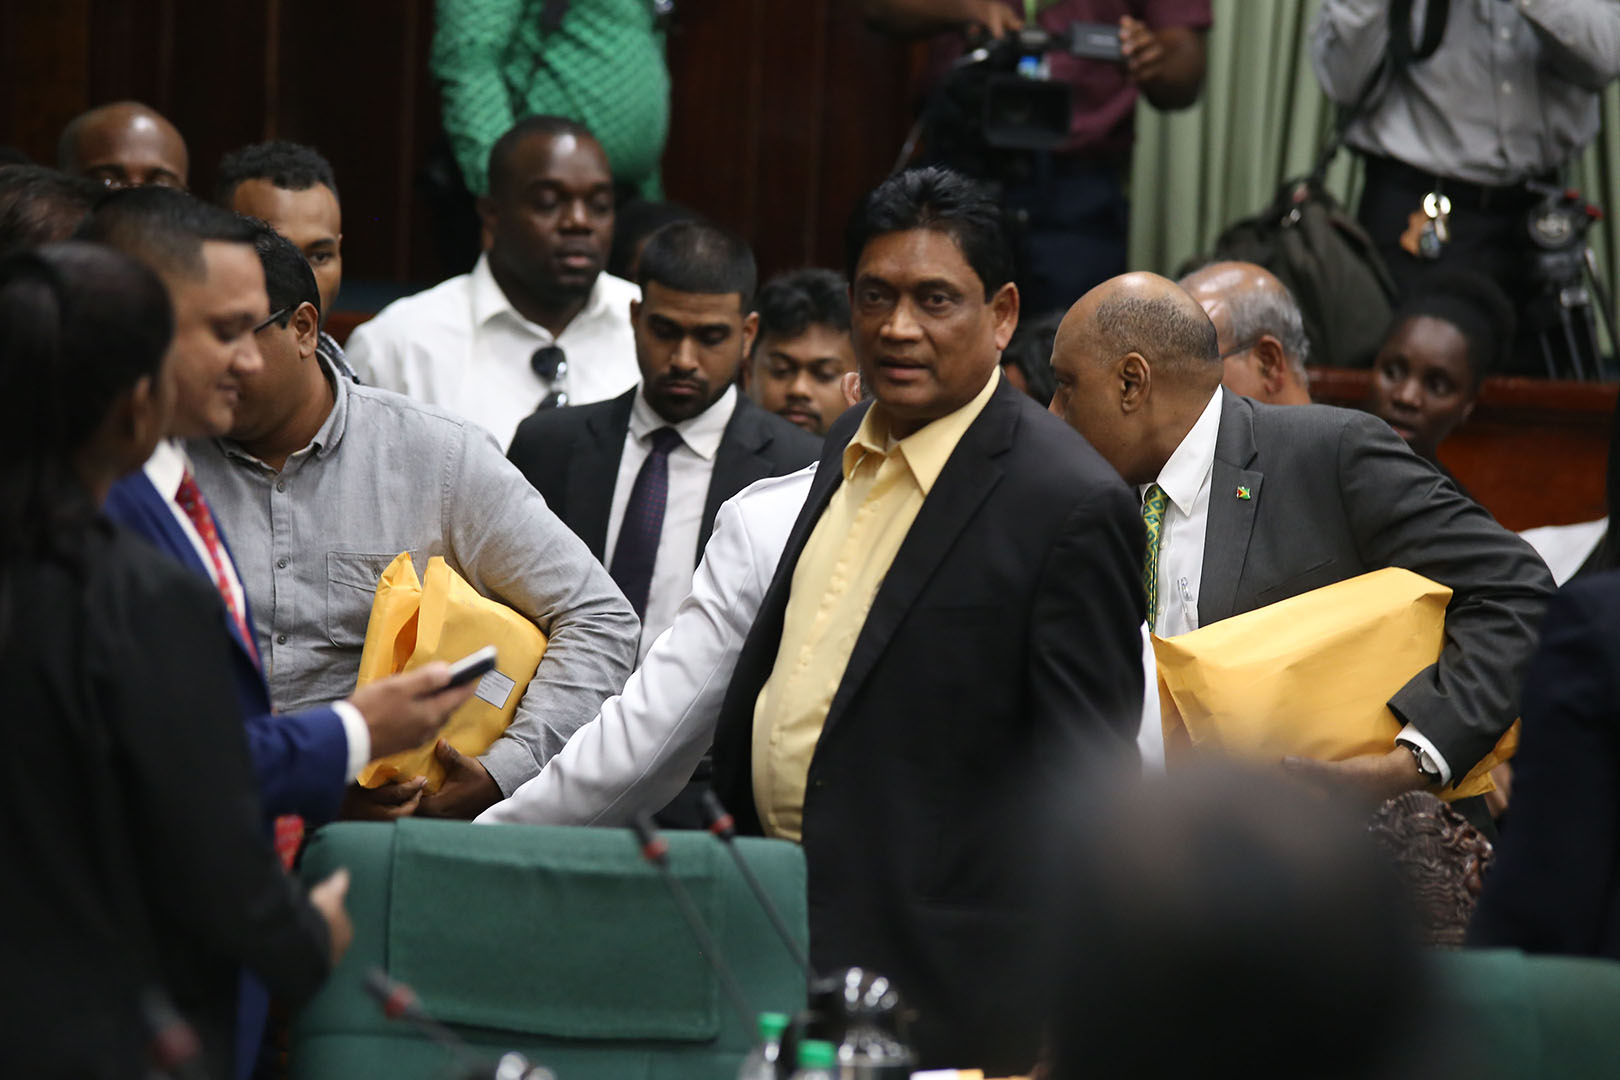 Former government MP Charrandass Persaud (at right in foreground) after his stunning vote in favour of the PPP/C’s motion of no-confidence against the government. (Stabroek News file photo)